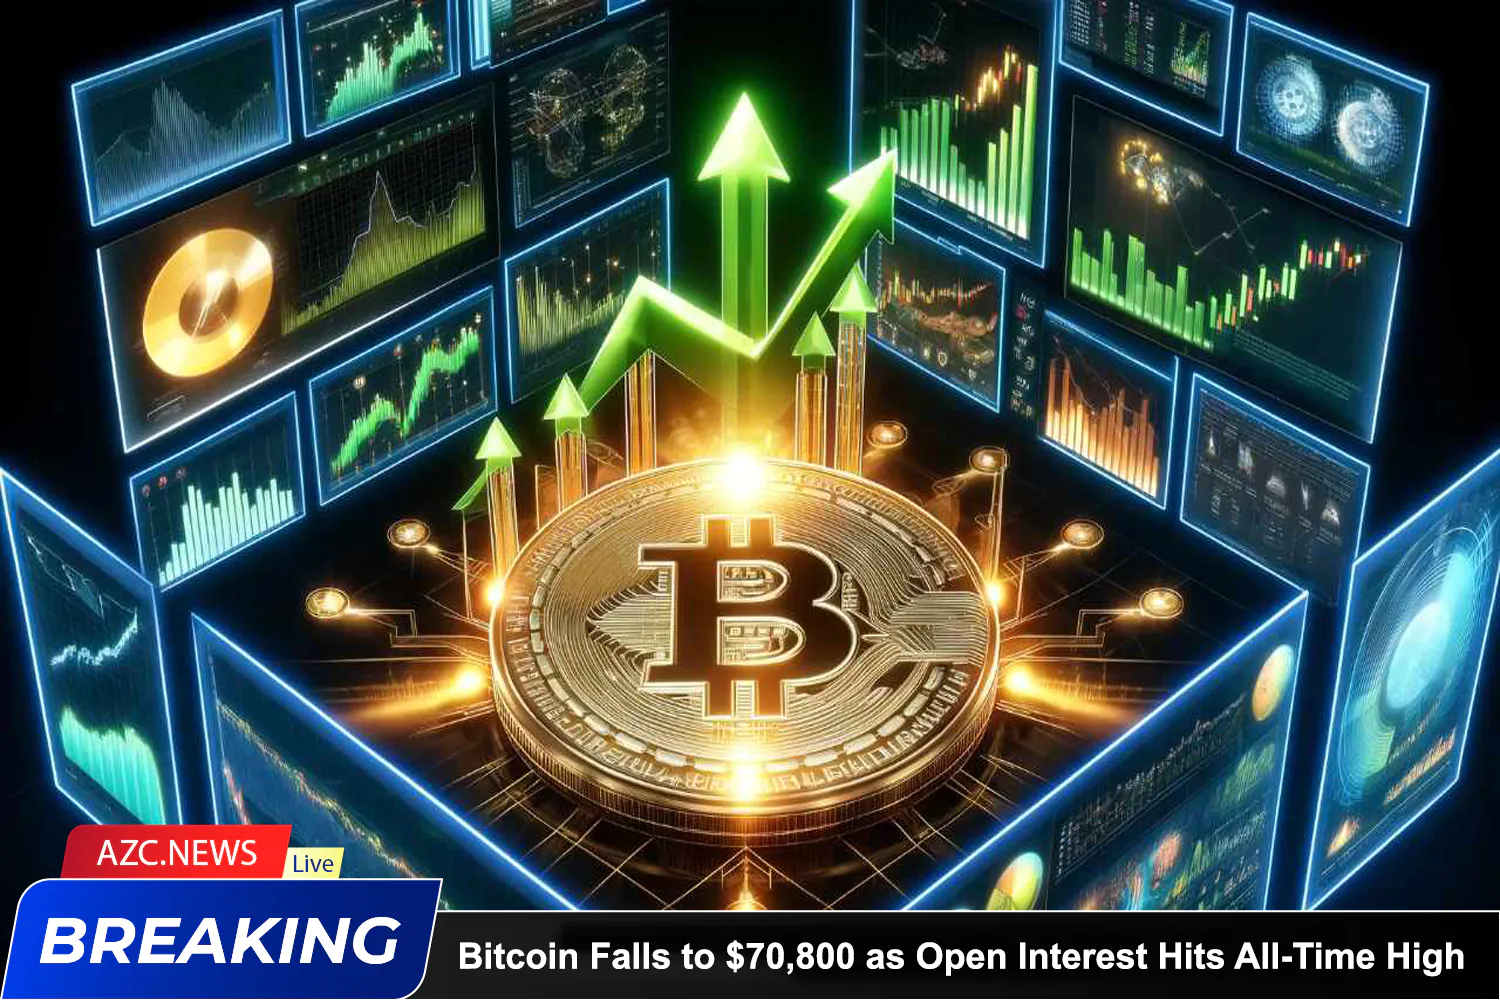 Azcnews Bitcoin Falls To $70,800 As Open Interest Hits All Time High